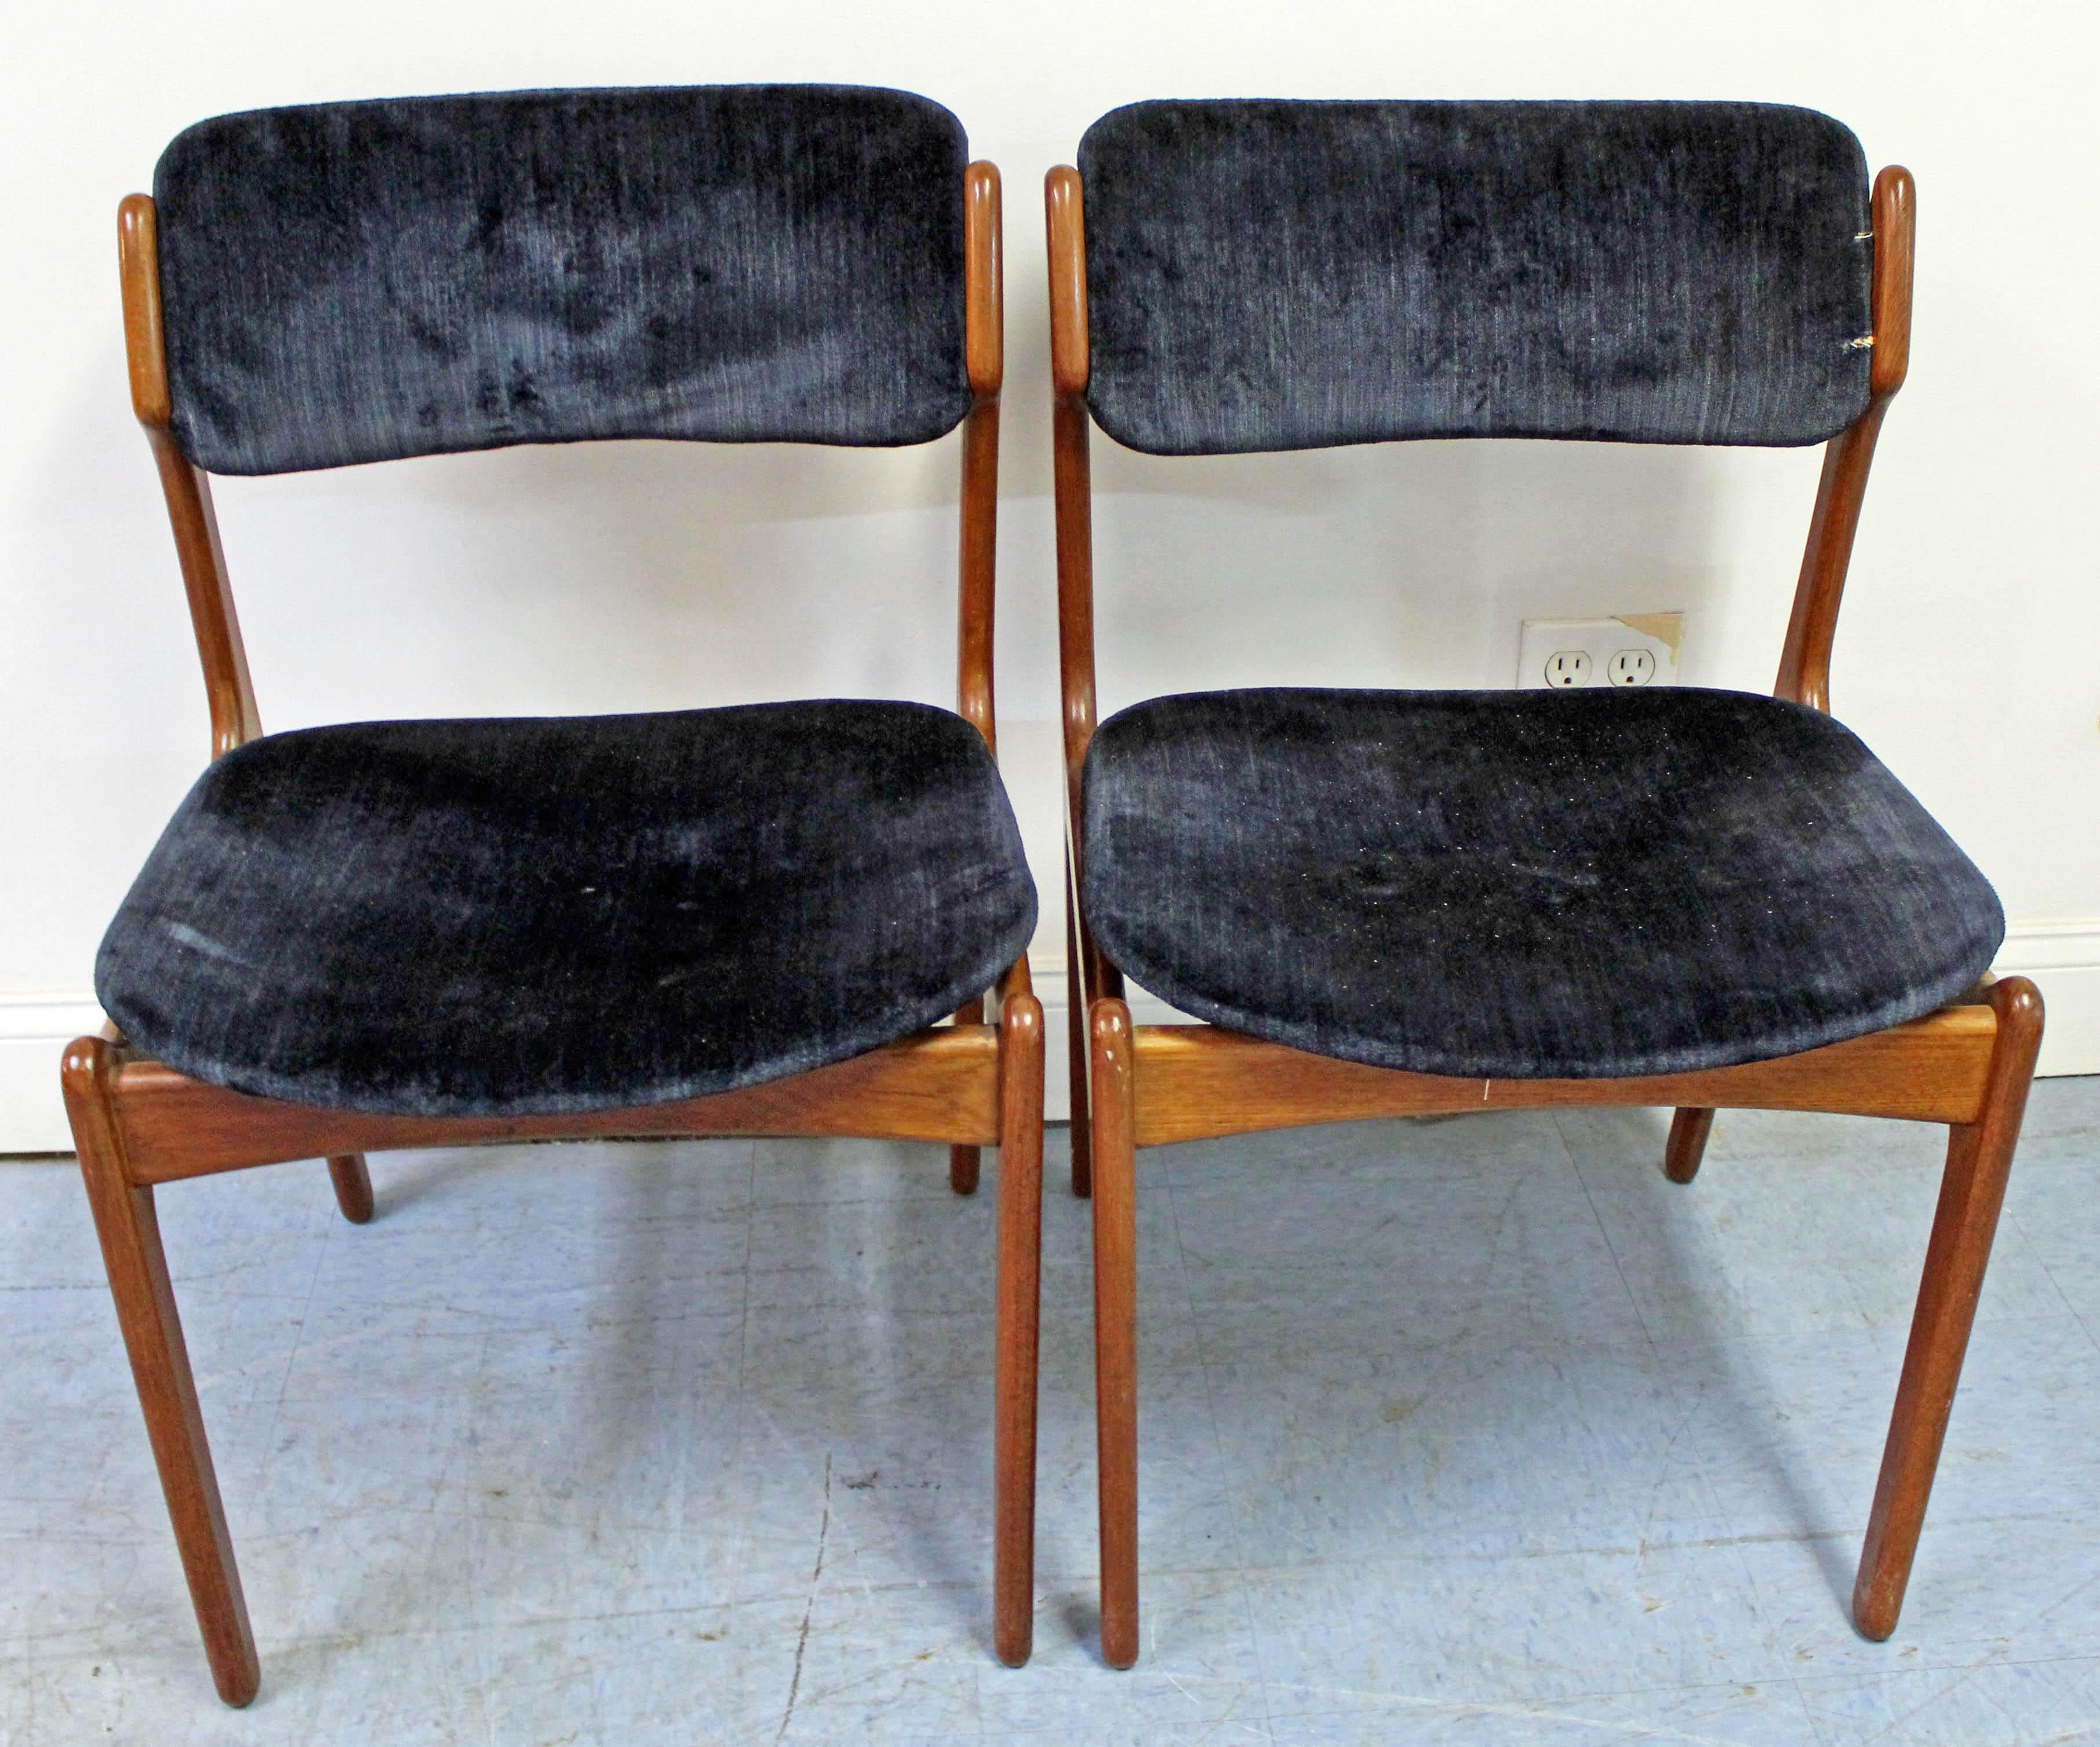 Offered is a pair of Danish modern Model 49 dining chairs by Erik Buch for O.D. Mobler. Includes two teak side chairs with elegant lines and floating seats with velvet-type upholstery. They're in decent vintage condition with normal age wear